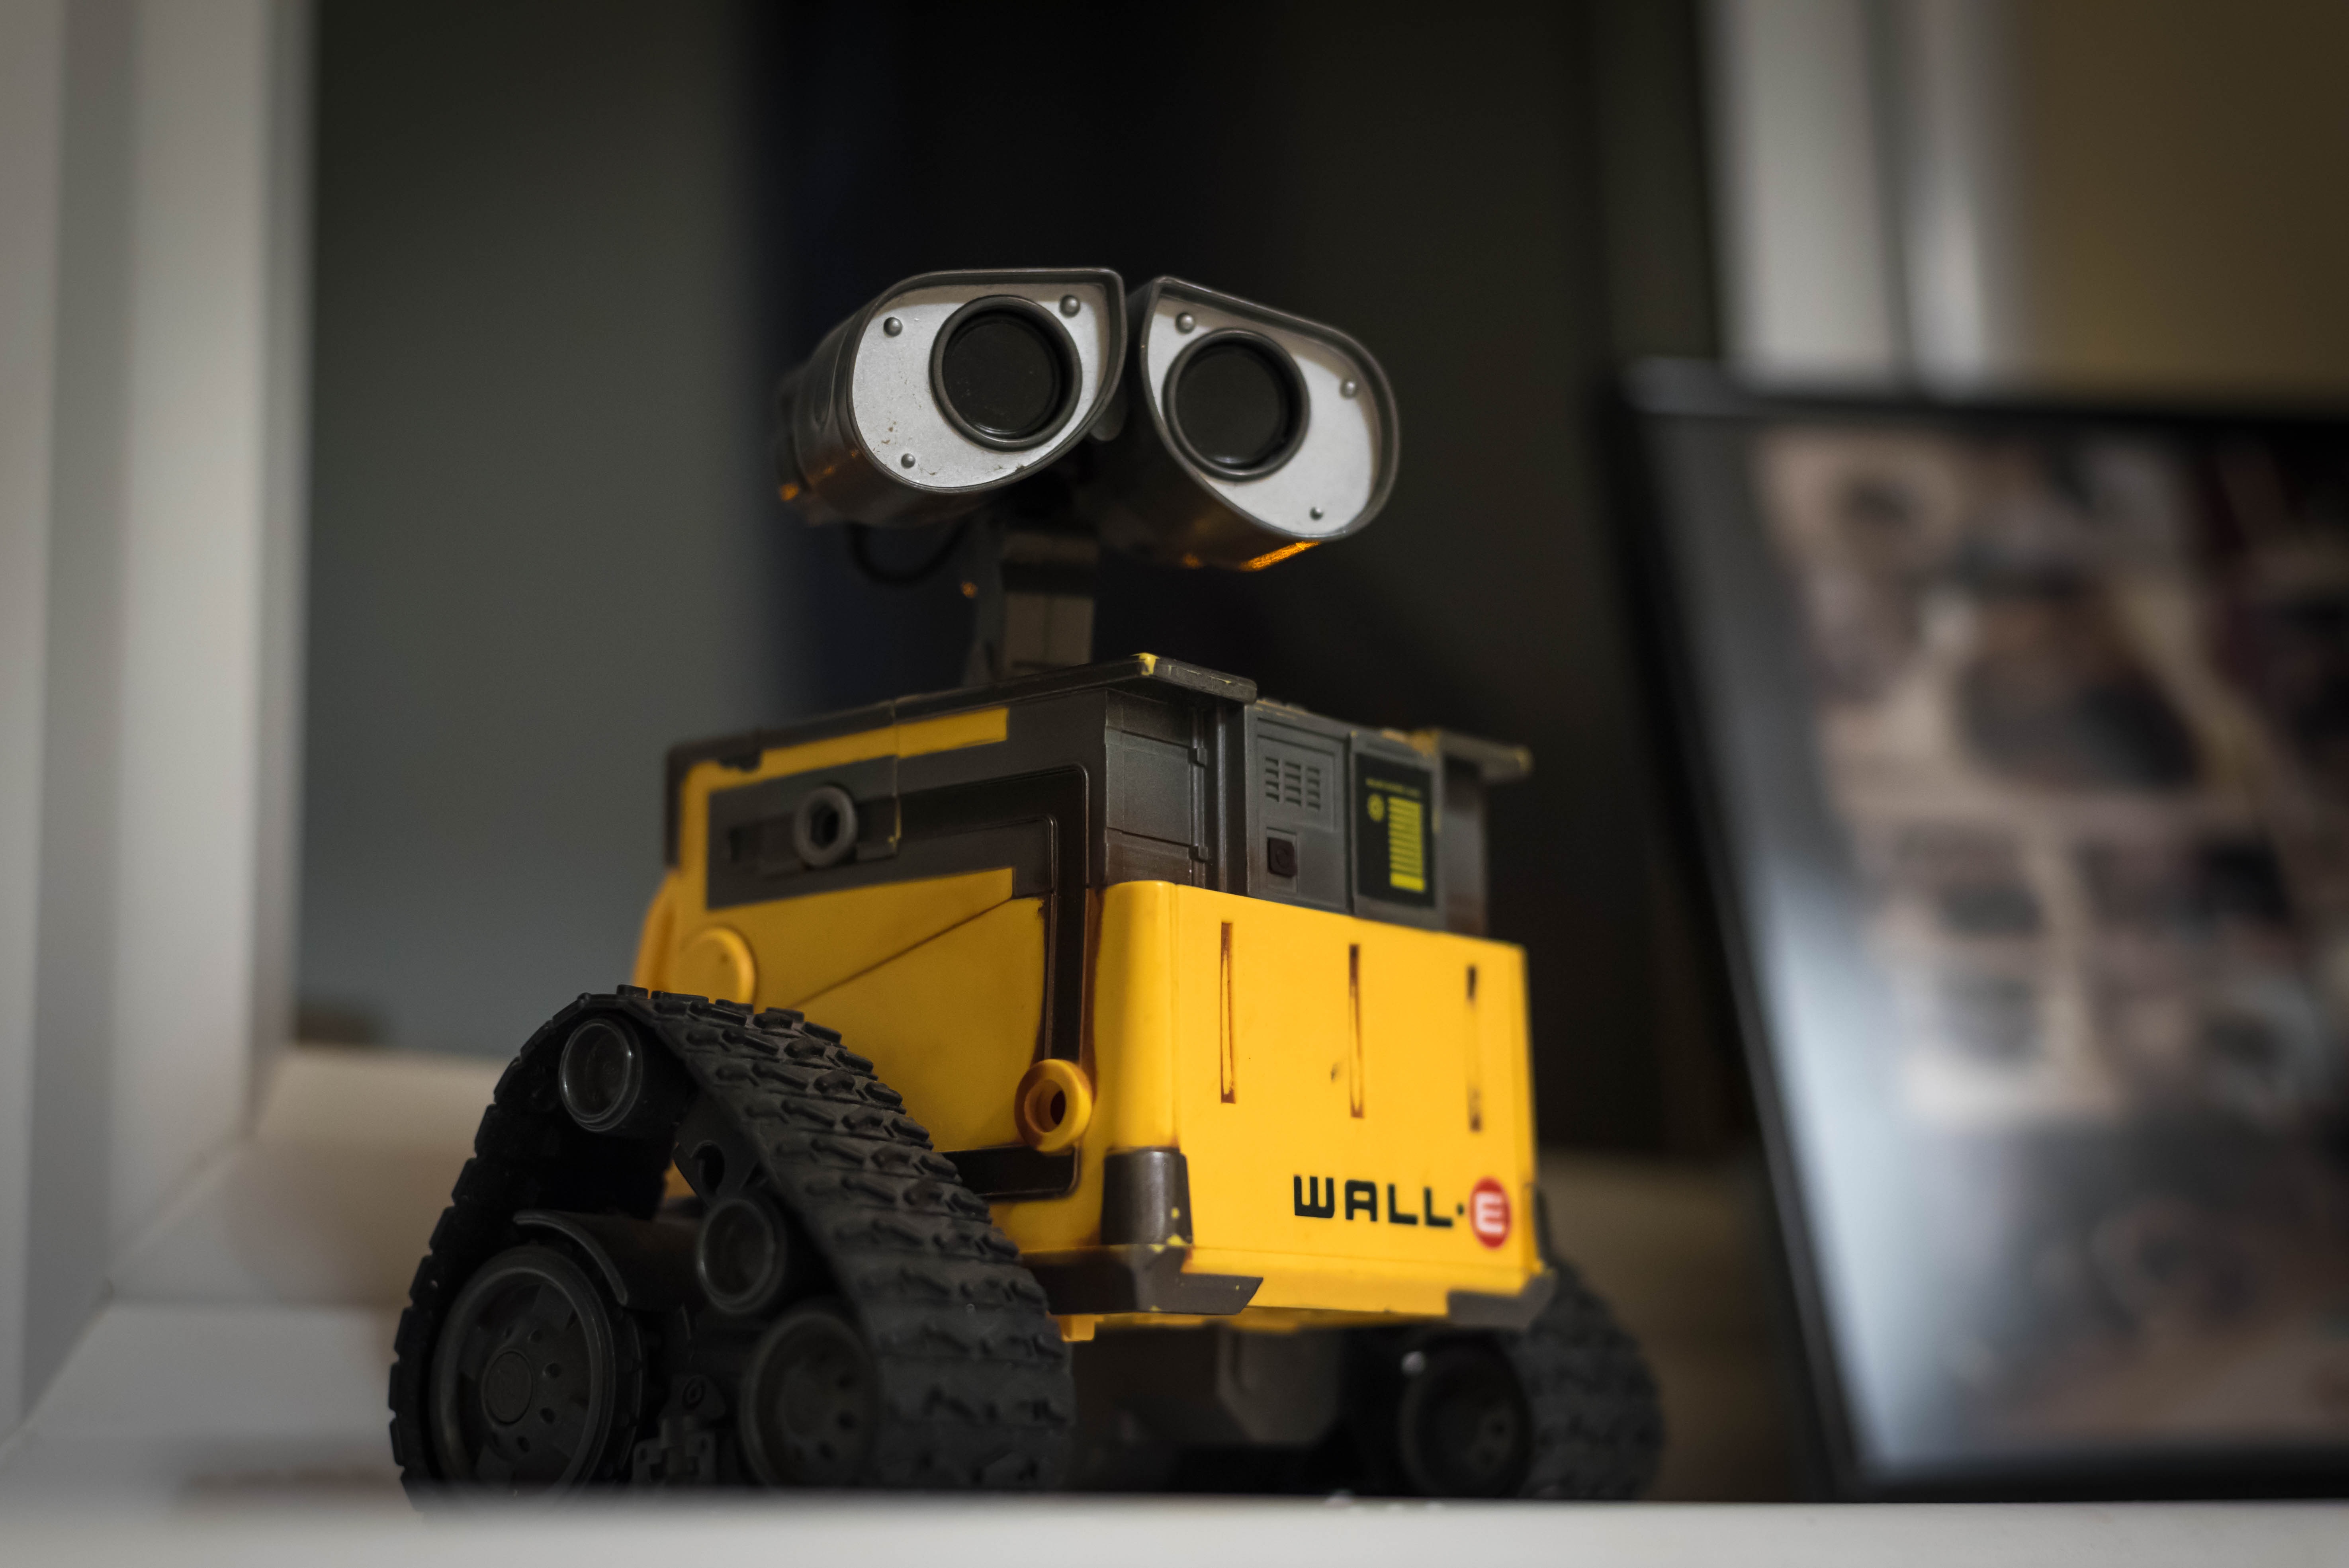 Yellow Walle Robot Figure Toy Free Image Download